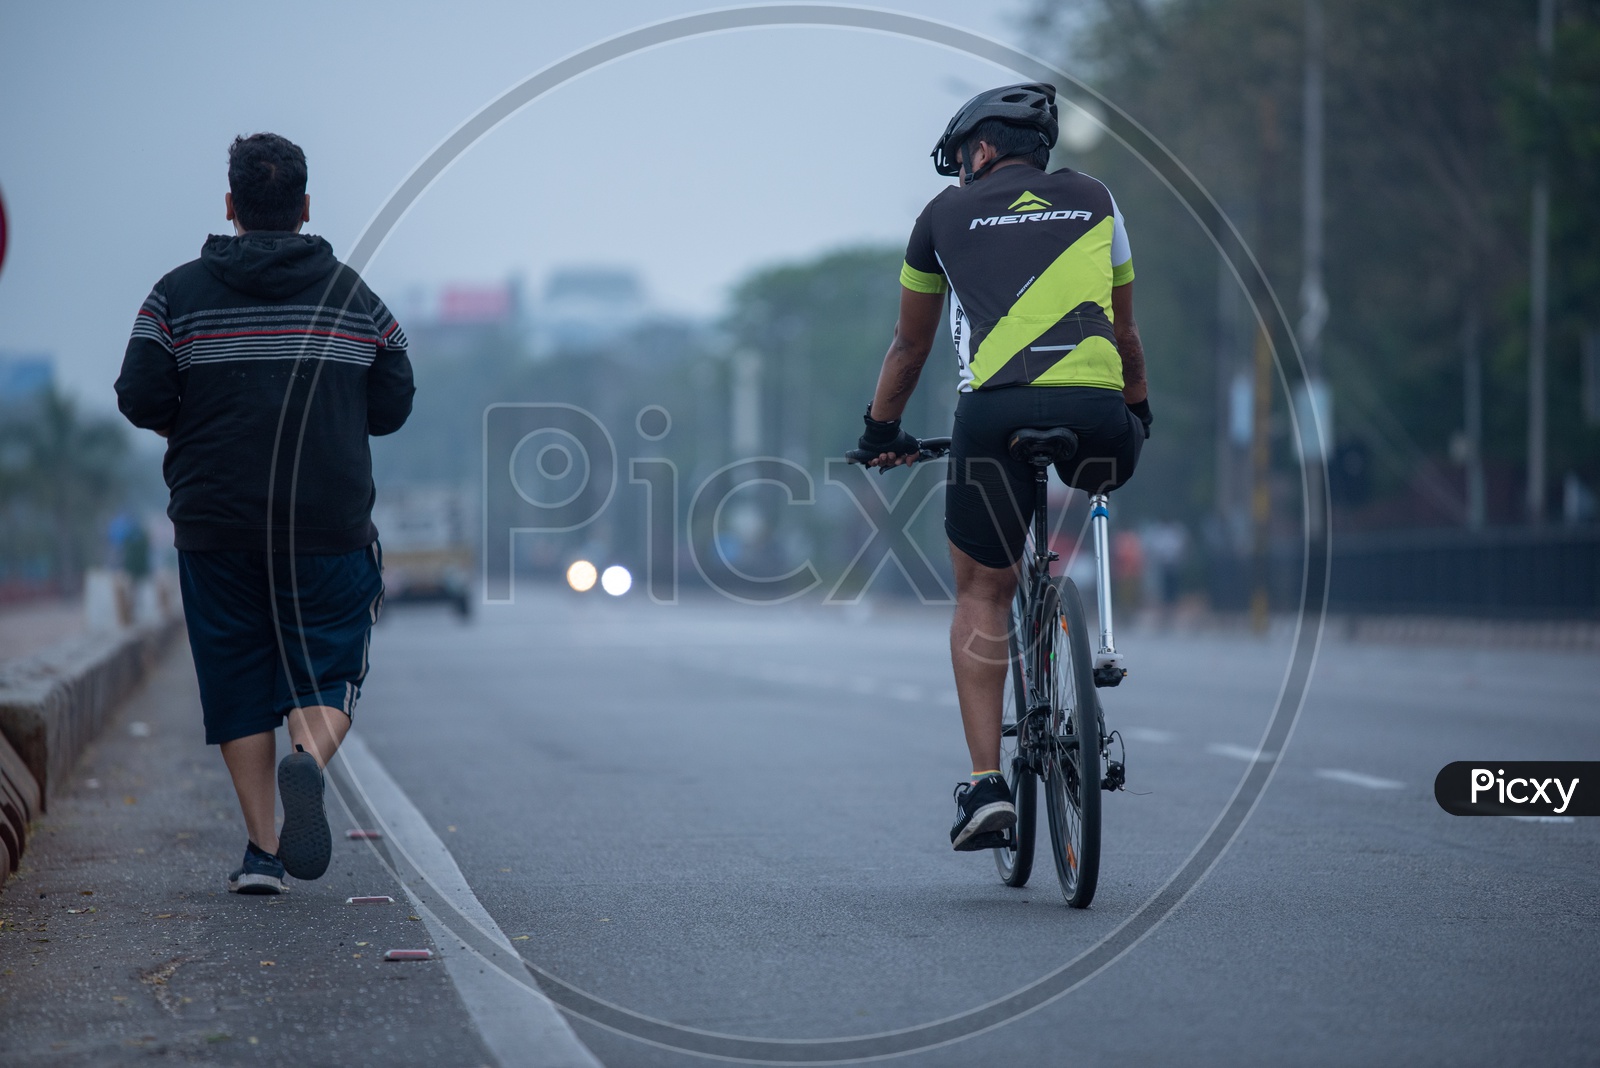 Physically Challenged Man With Leg Prosthesis Cycling on Tankbund